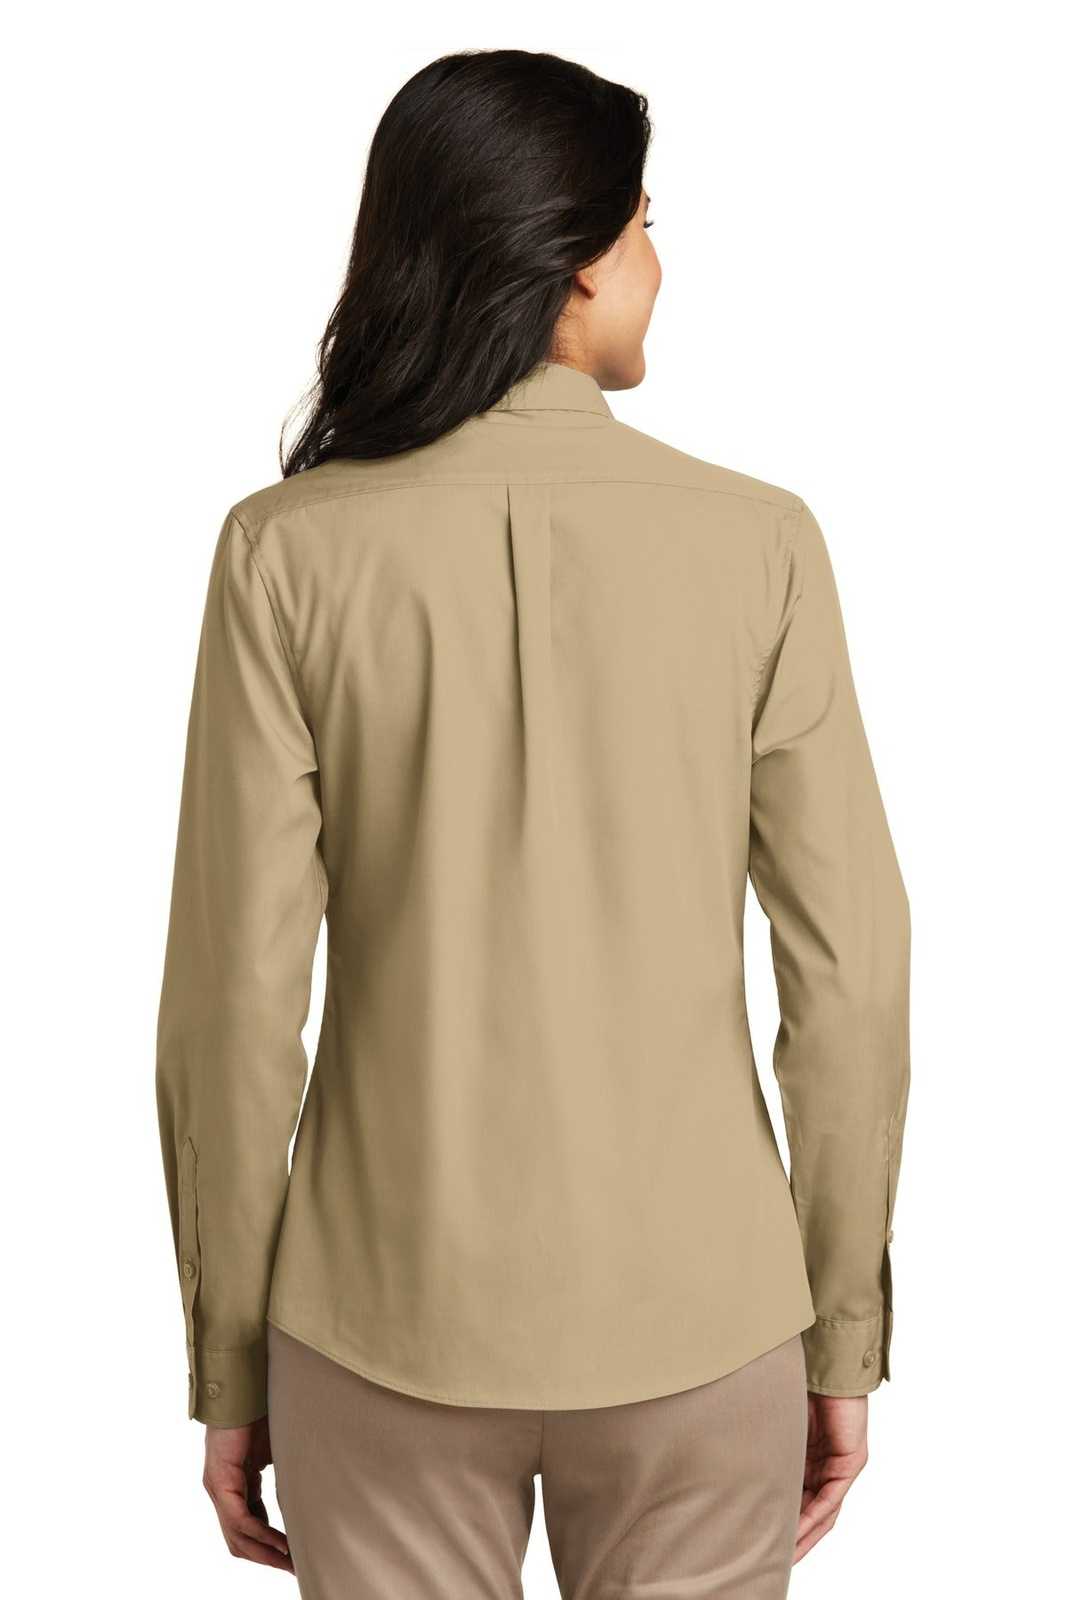 Port Authority LW100 Ladies Long Sleeve Carefree Poplin Shirt - Wheat - HIT a Double - 1